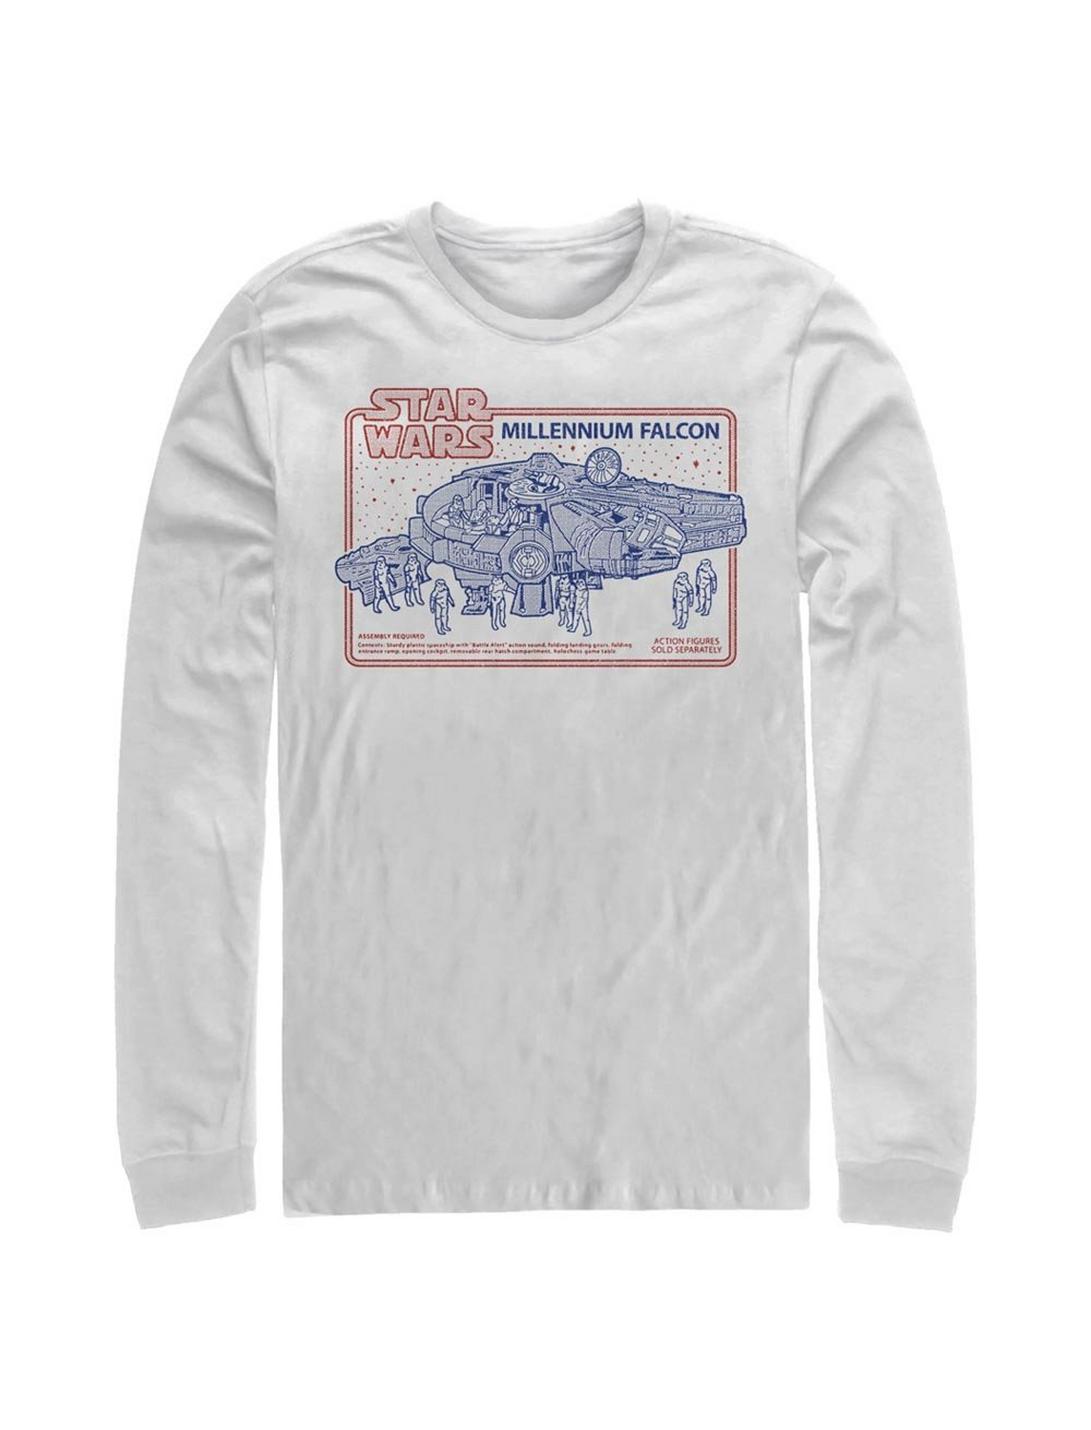 Star Wars Assembly Required Long-Sleeve T-Shirt, WHITE, hi-res